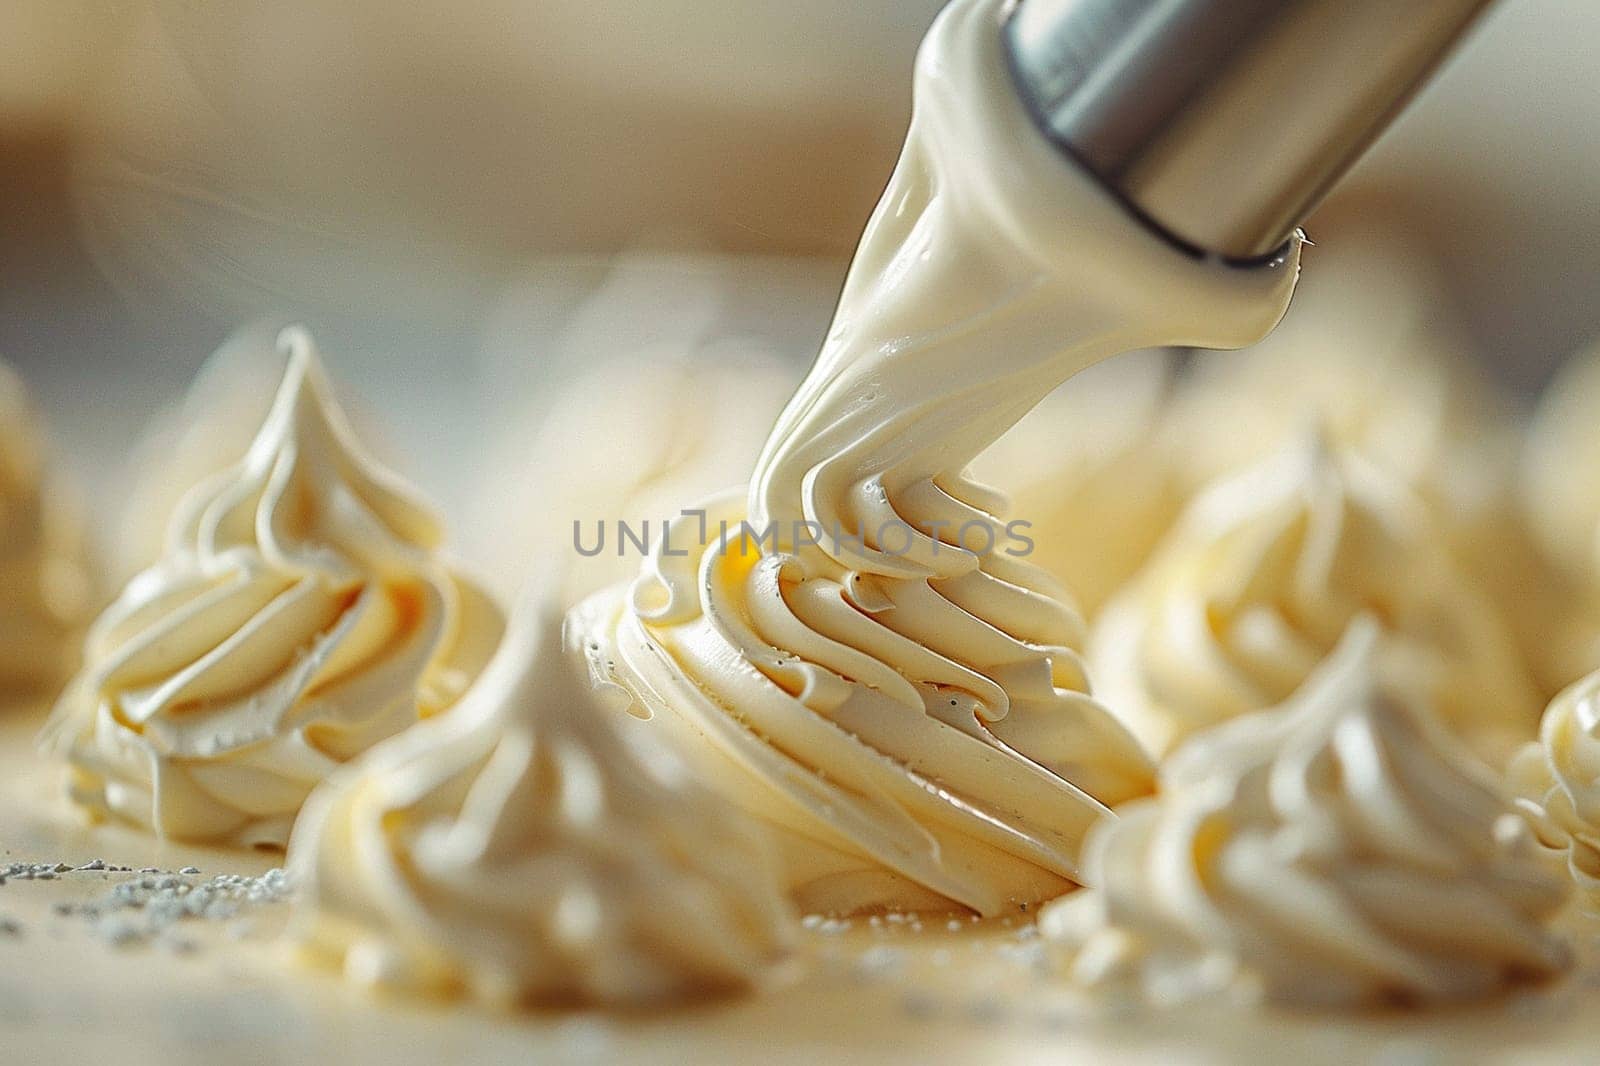 Whipped buttercream in swirl shape. Beautiful decor for a cake using a pastry bag.